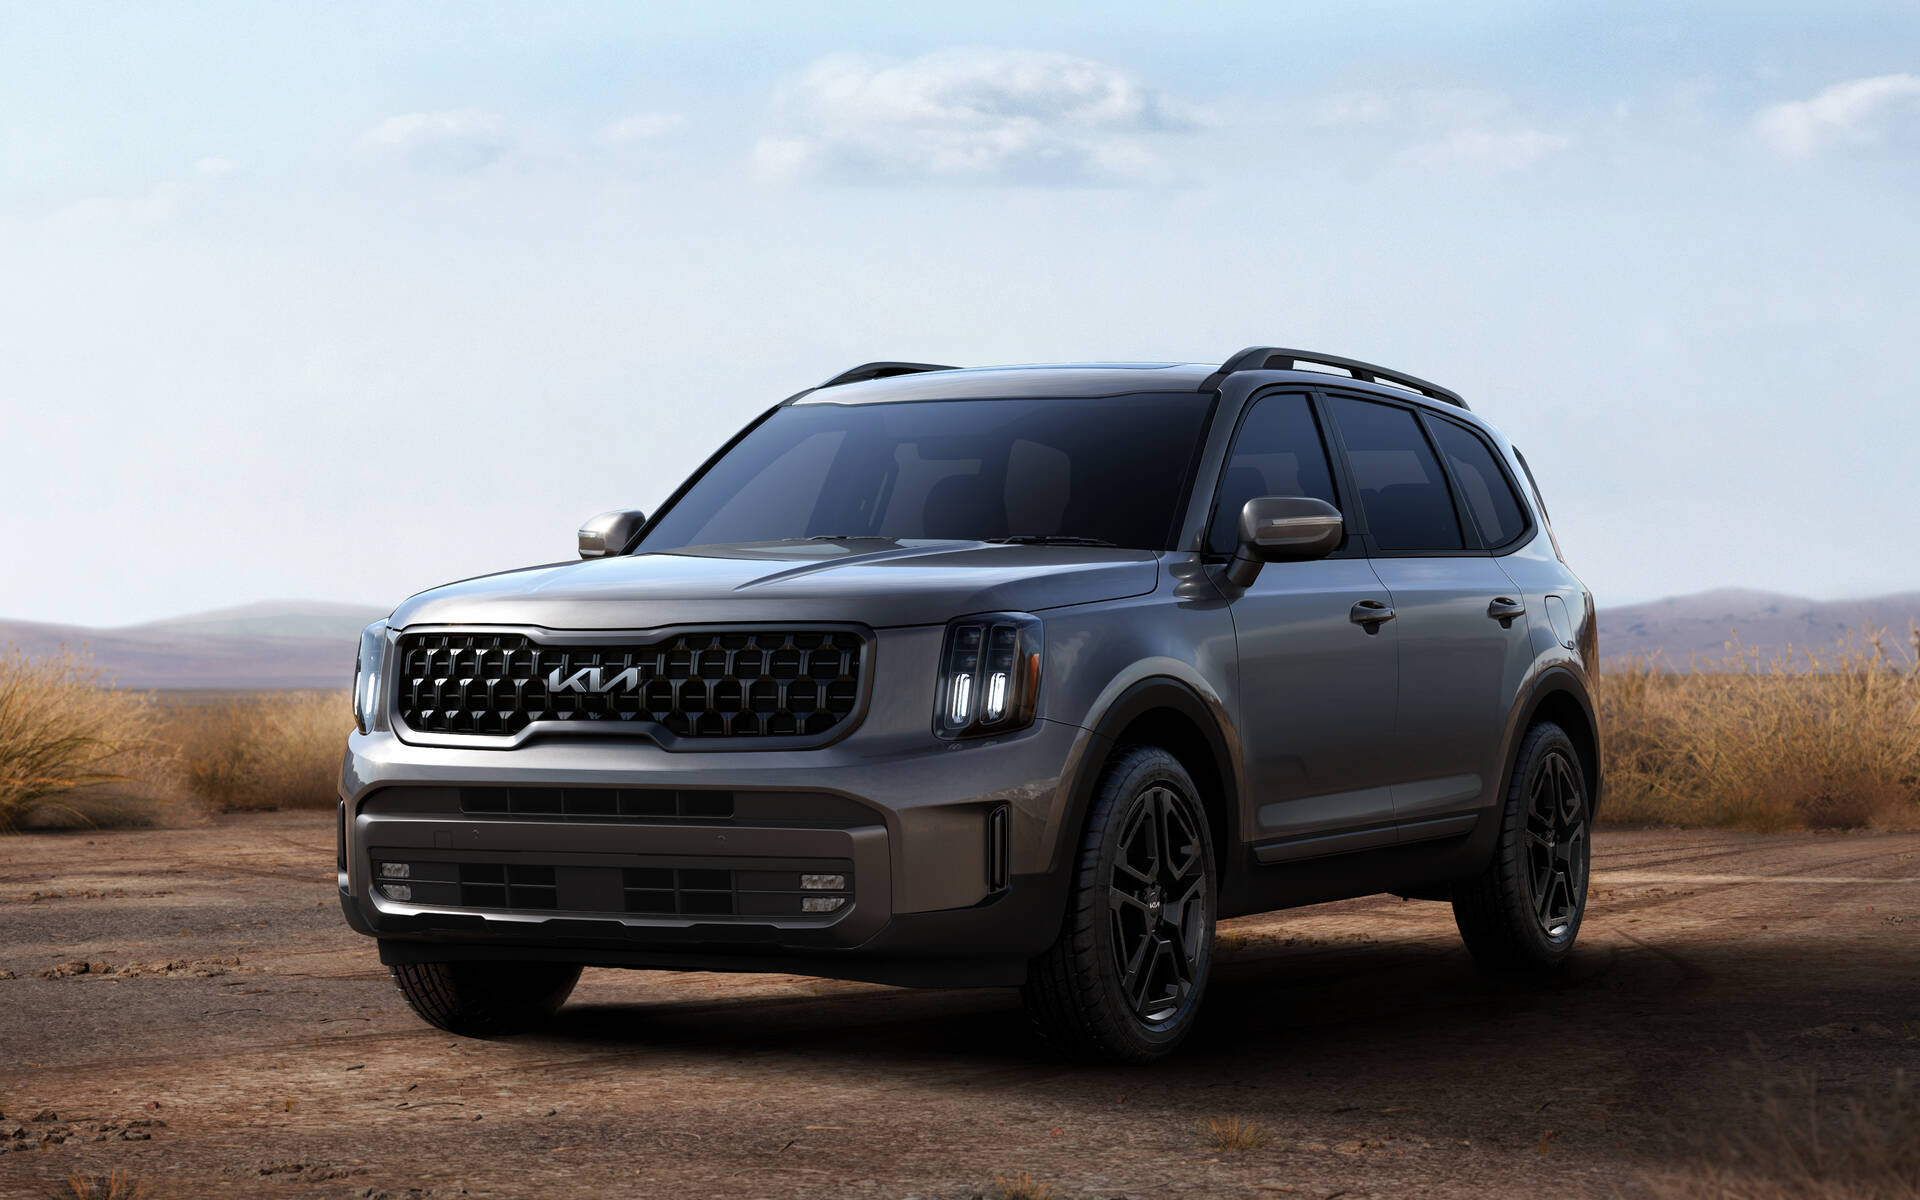 Refreshed 2023 Kia Telluride Adds X-Line Trim, Fancy Tech - The Car Guide